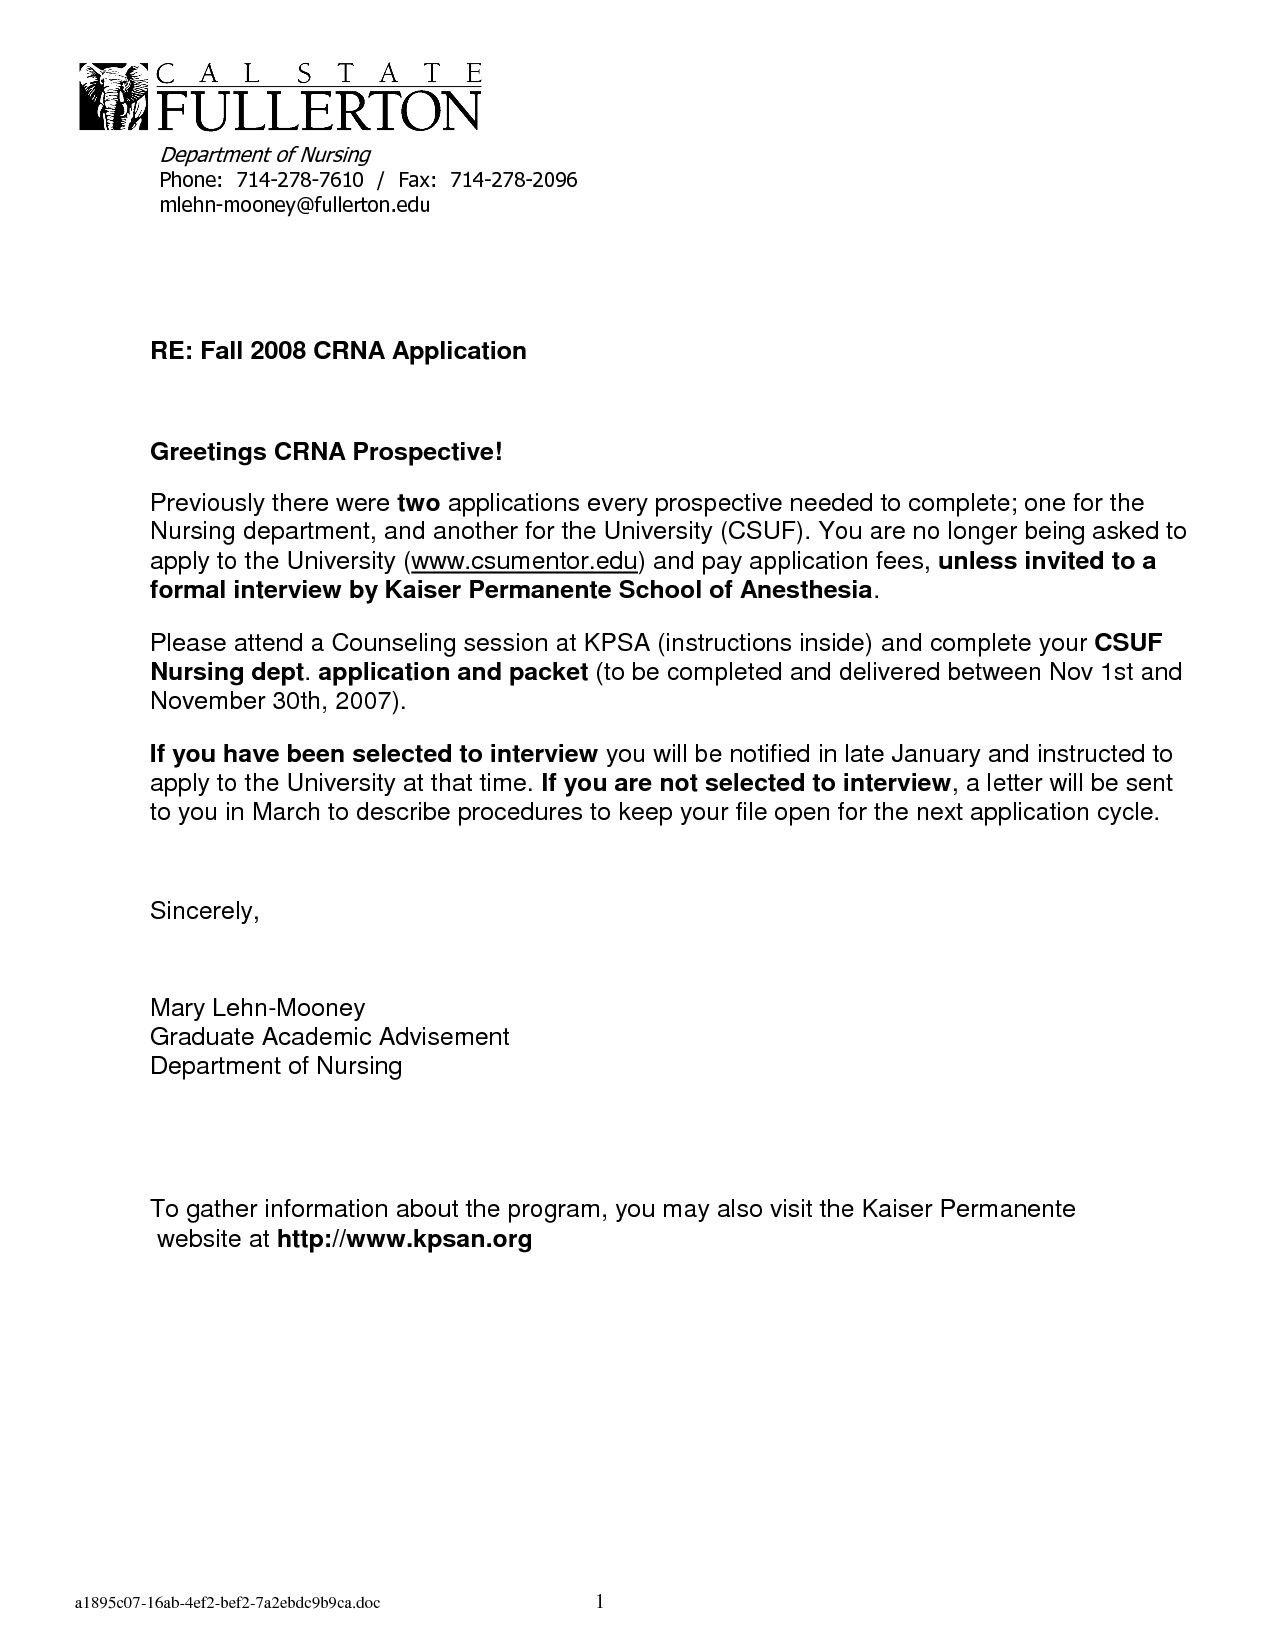 Letter Of Recommendation Cover Letter Debandje intended for sizing 1275 X 1650